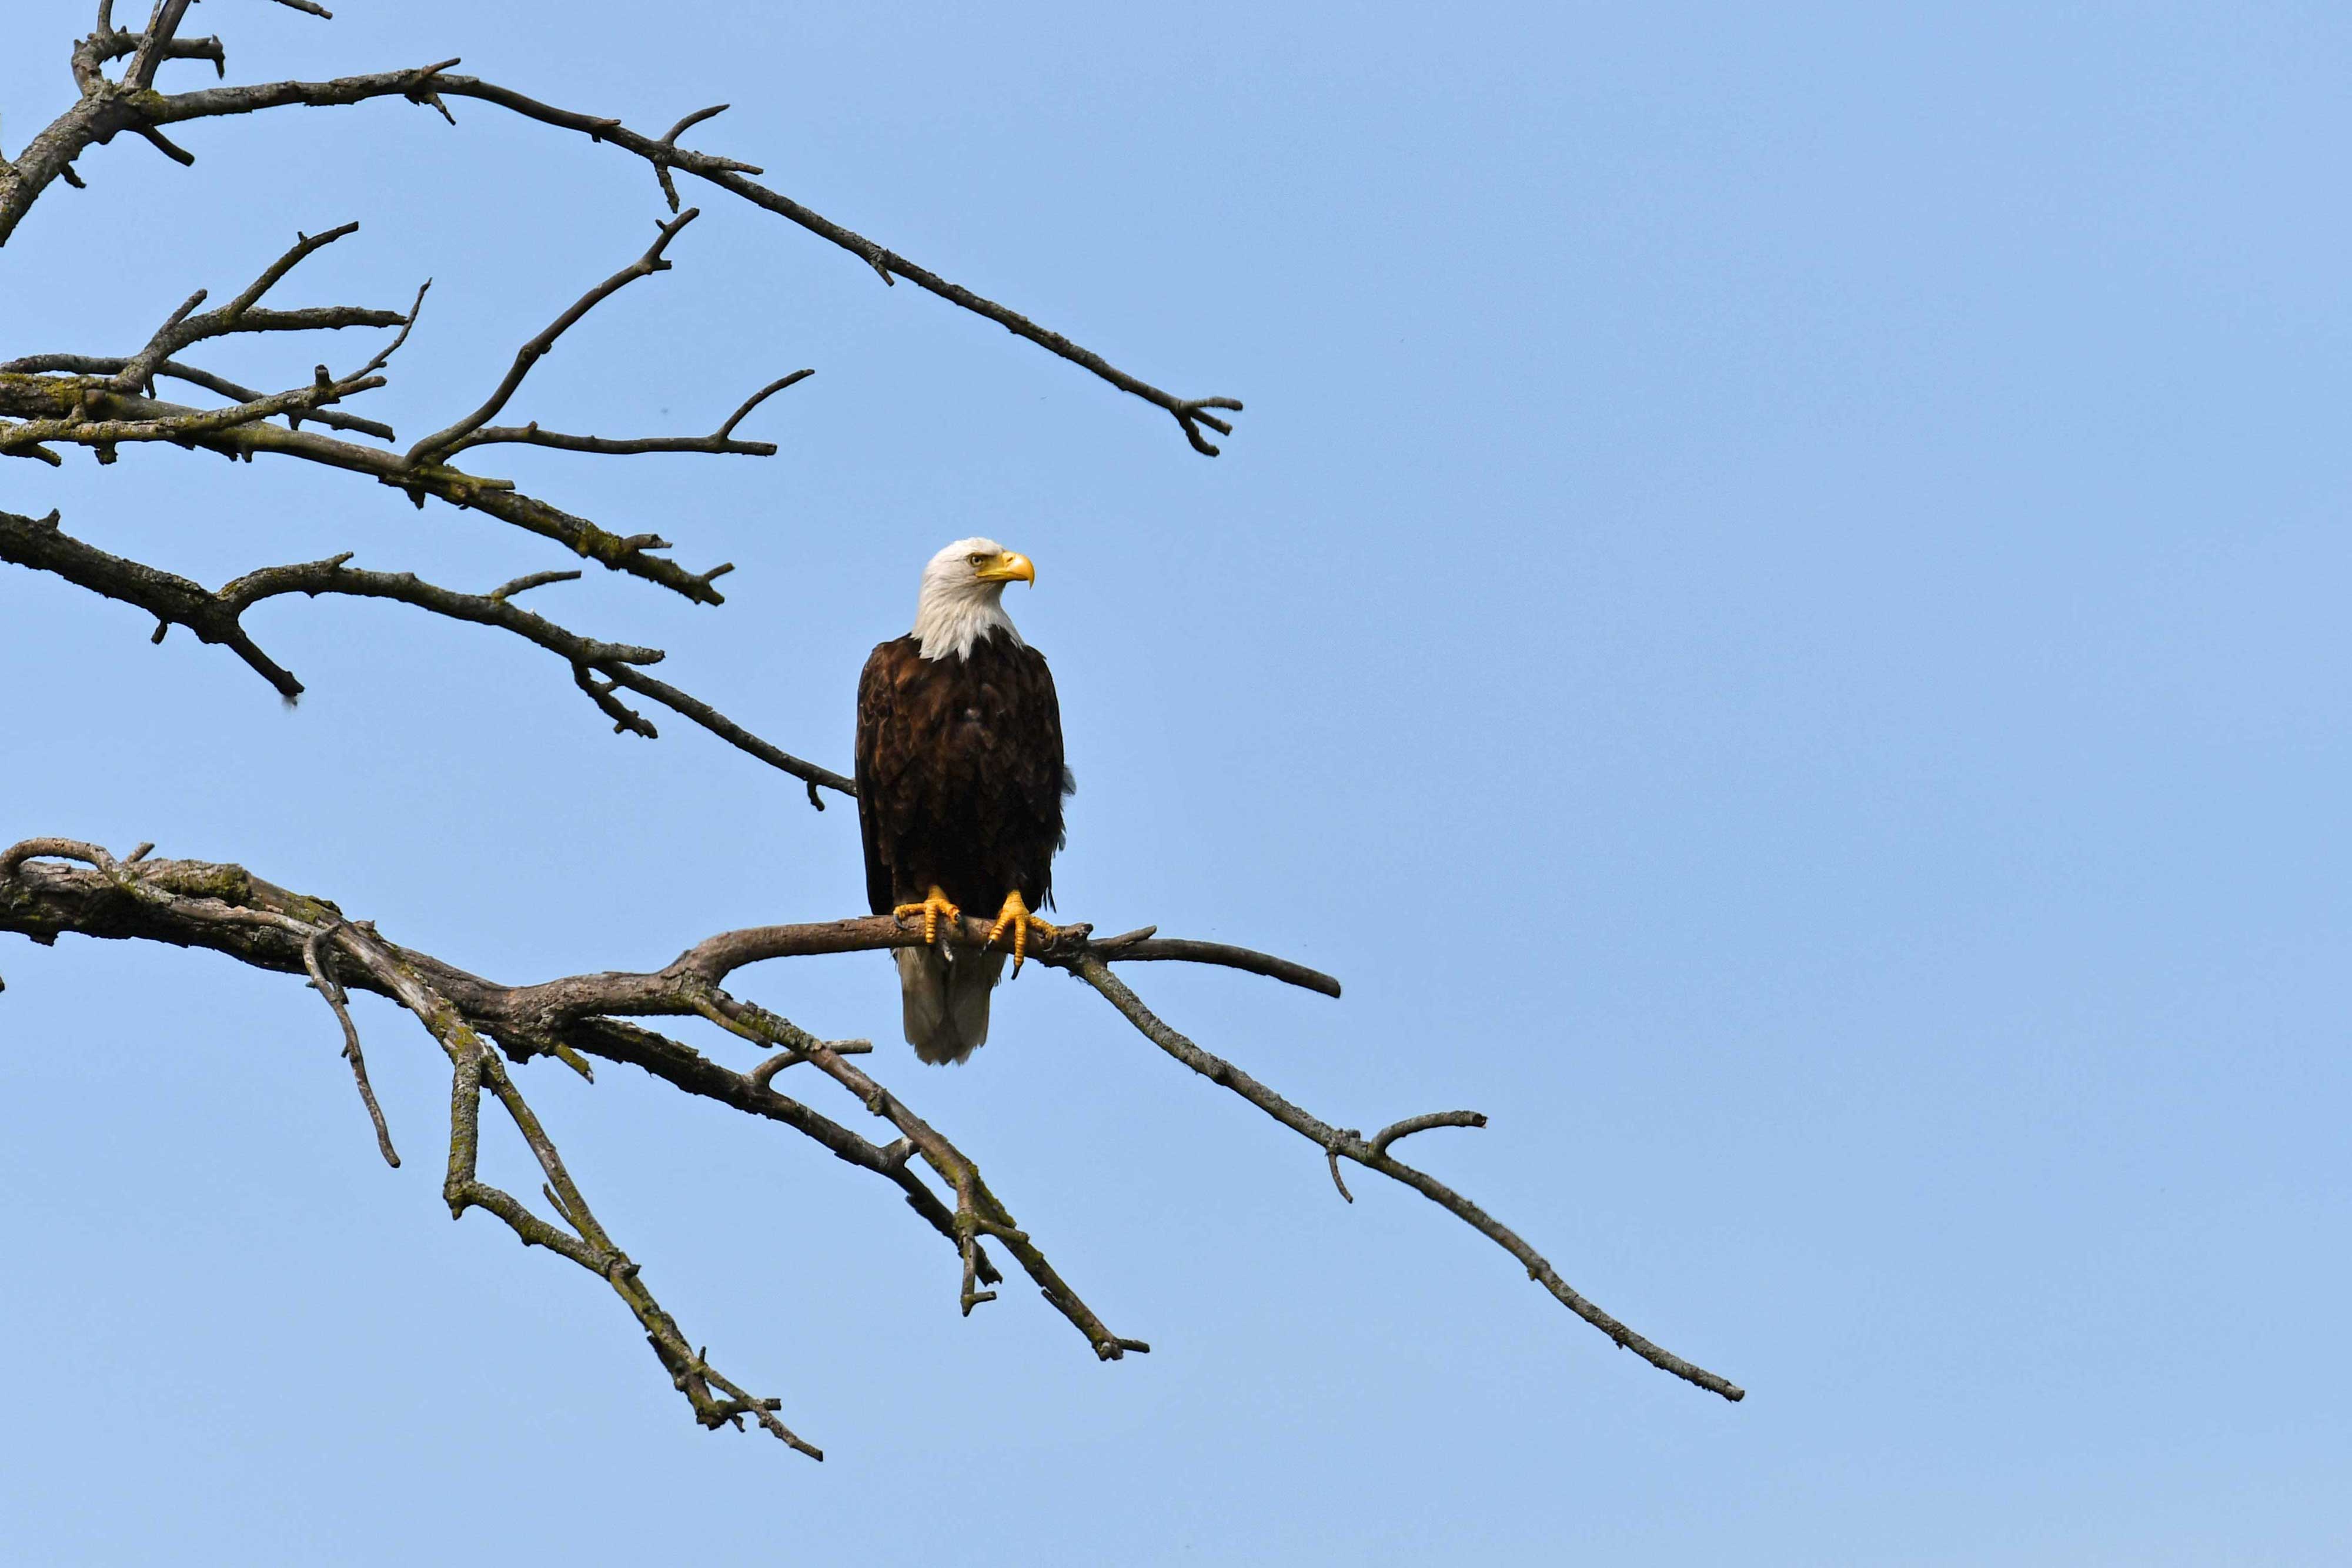 A bald eagle perched on a branch